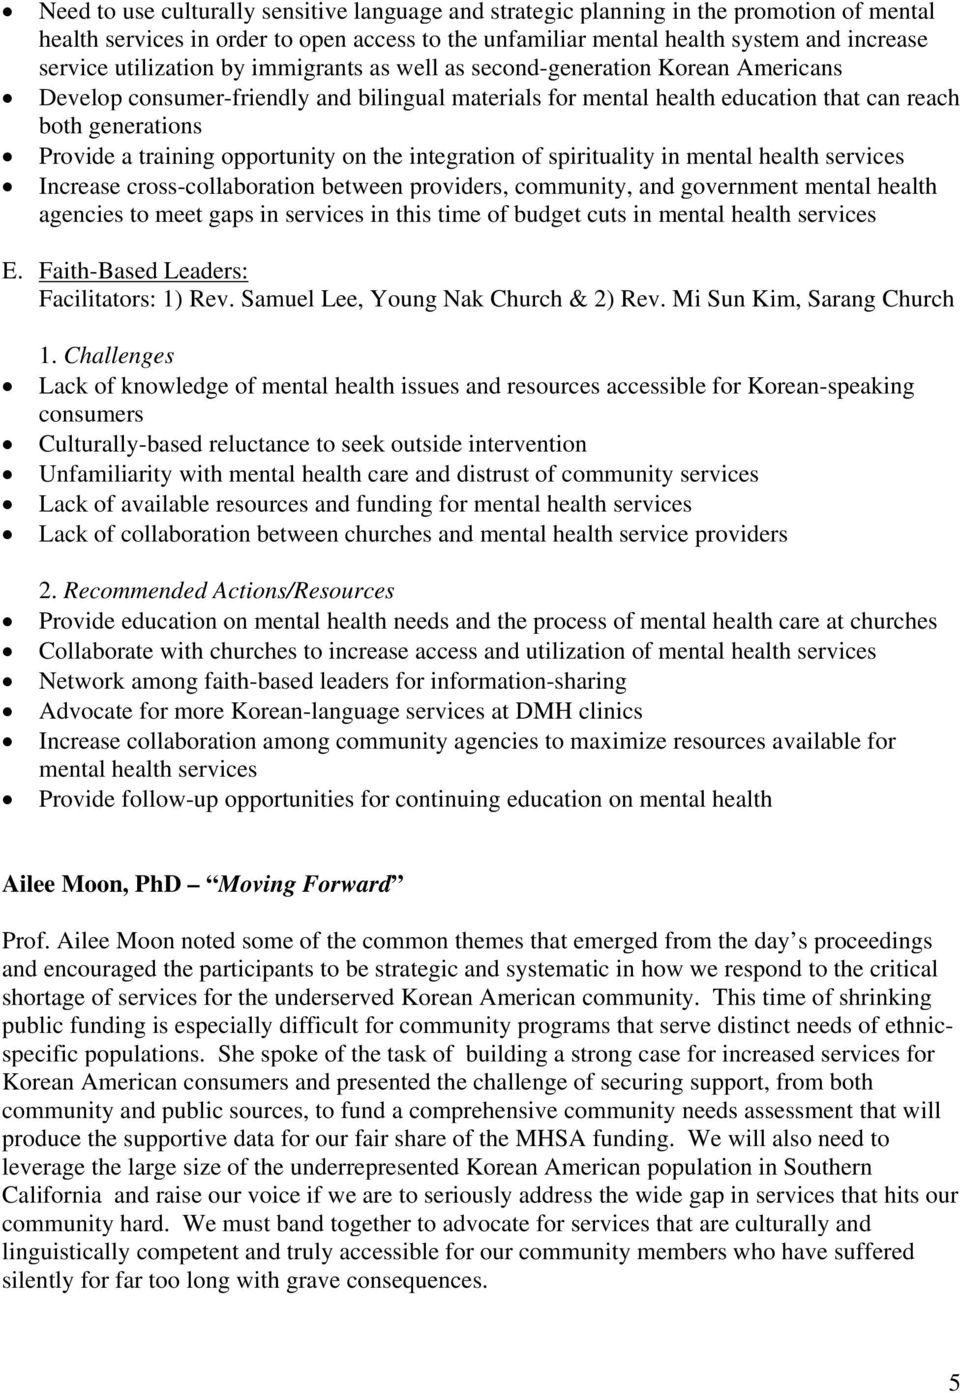 training opportunity on the integration of spirituality in mental health services Increase cross-collaboration between providers, community, and government mental health agencies to meet gaps in